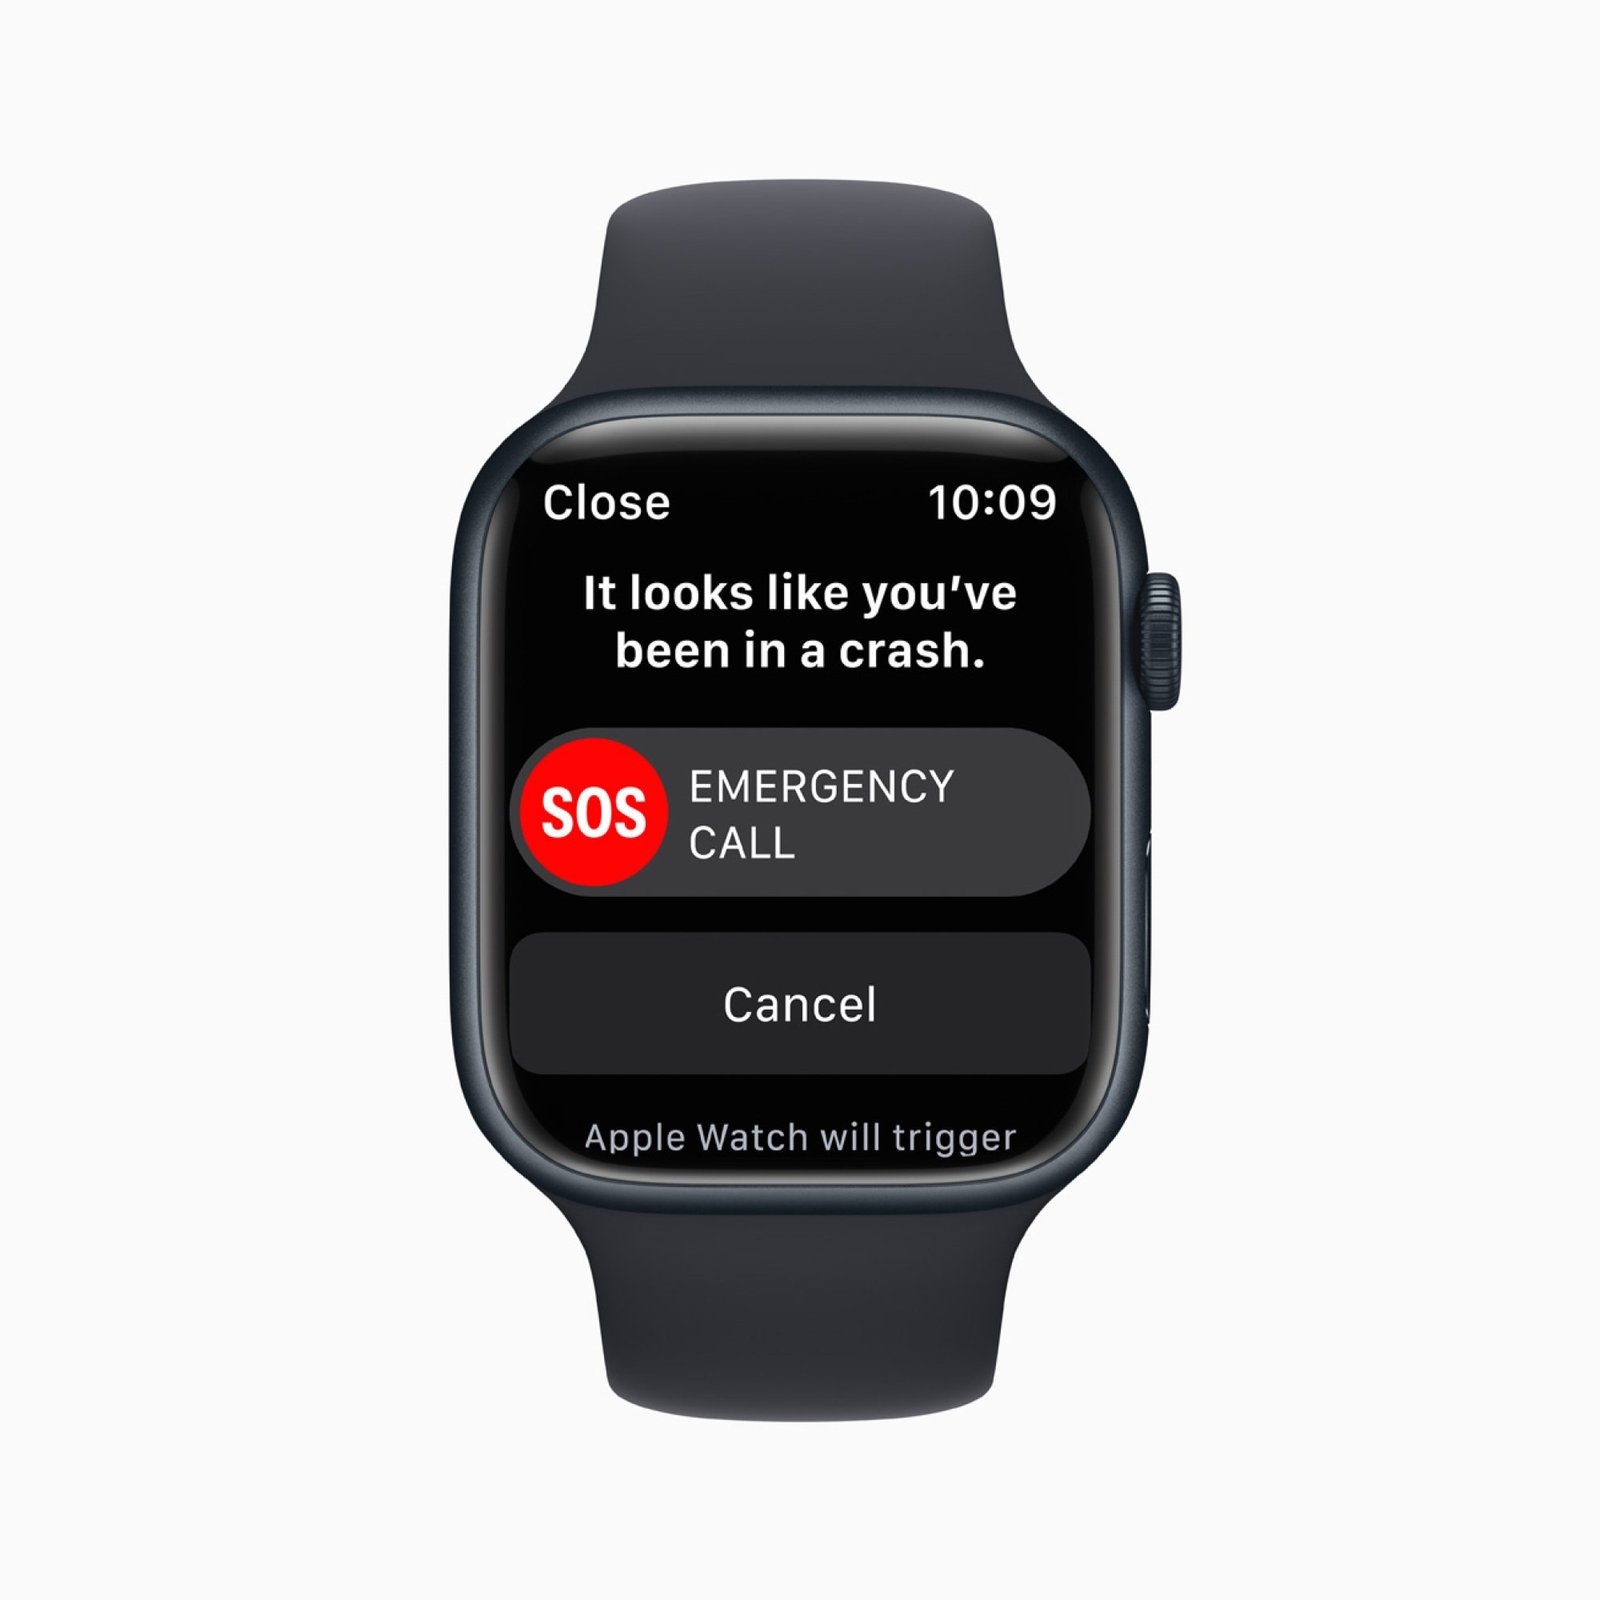 Apple Watch Series 8 showing emergency crash detection feature